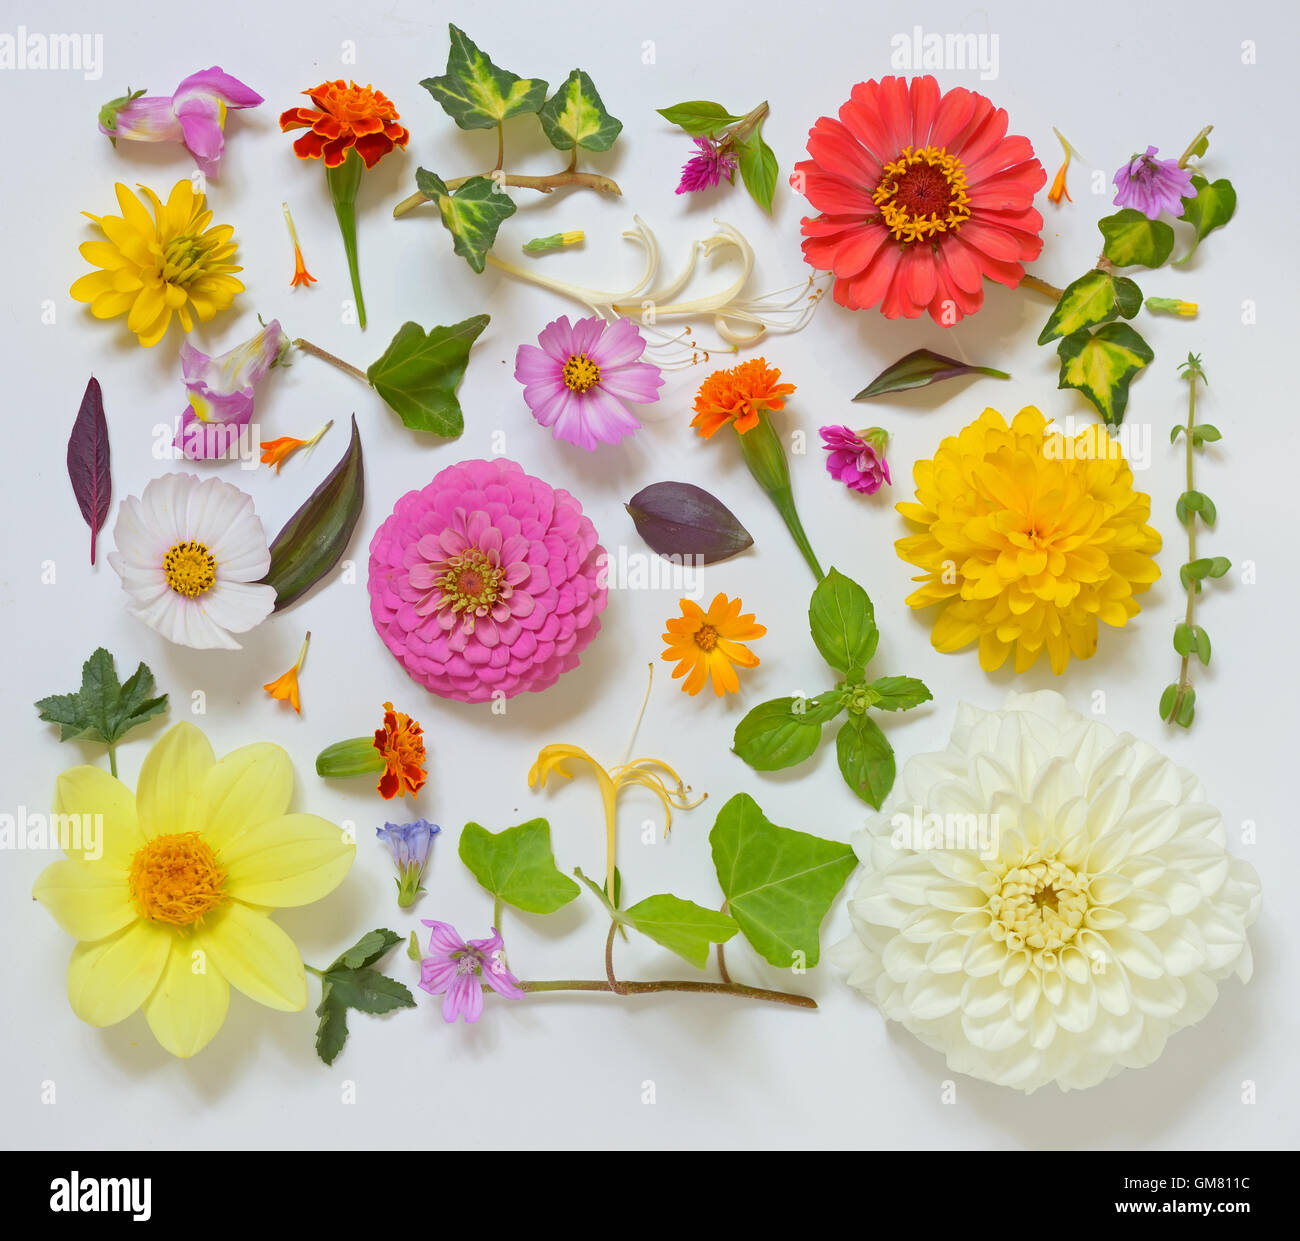 Selection of Various Flowers Isolated on White Background Stock Photo